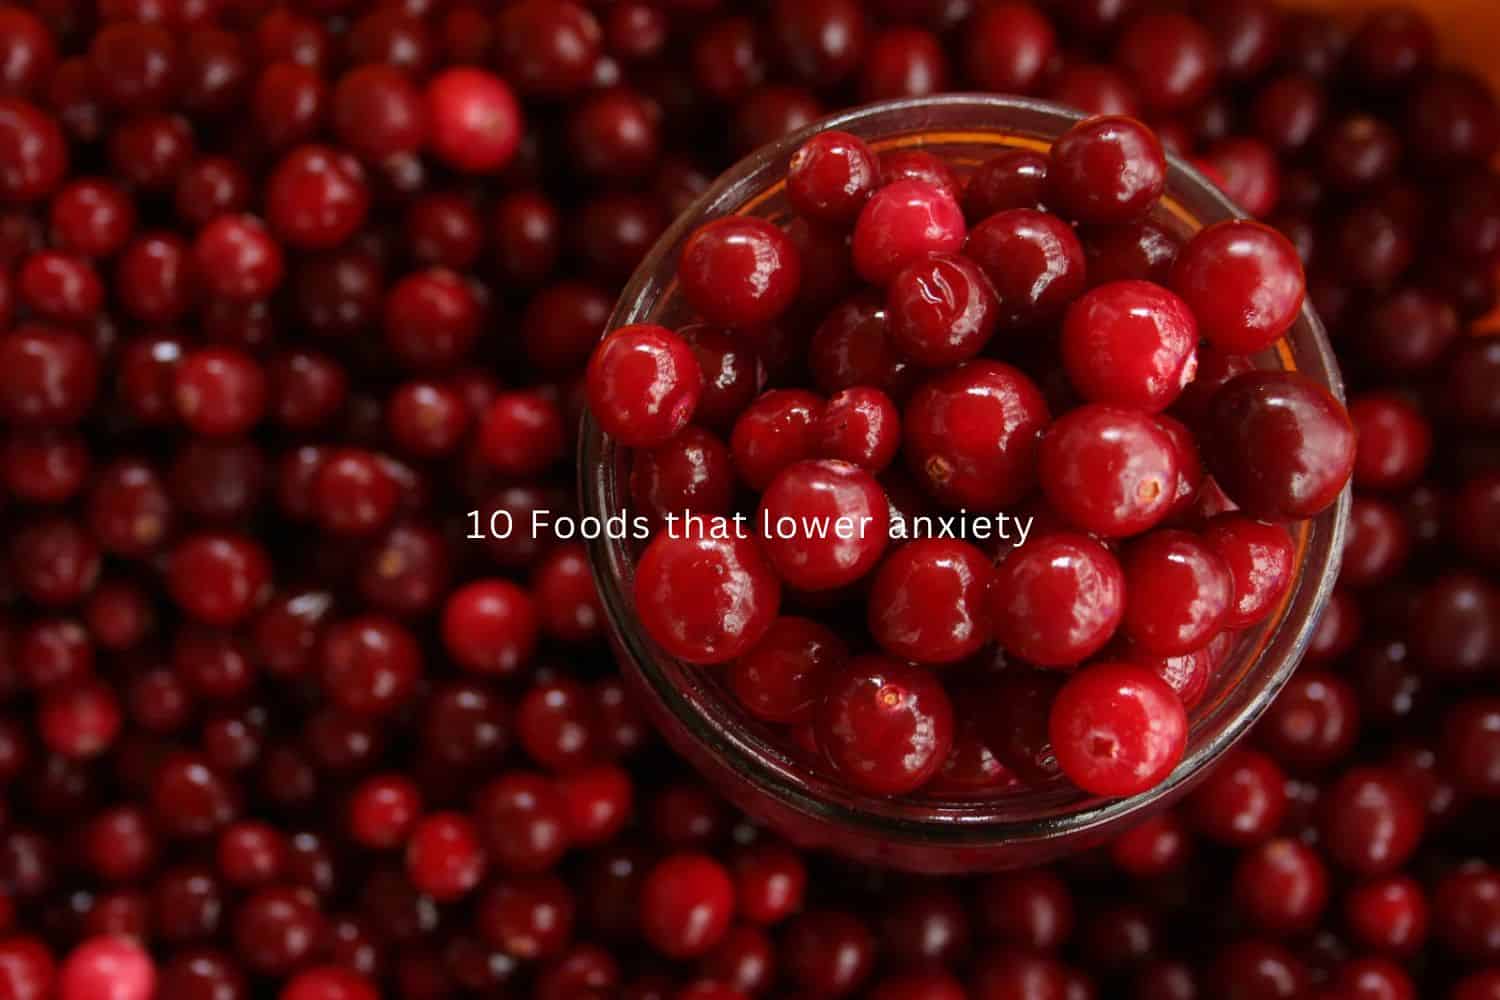 full image of red cherries, on top of cherries background is a glass bowl filled with red cherries